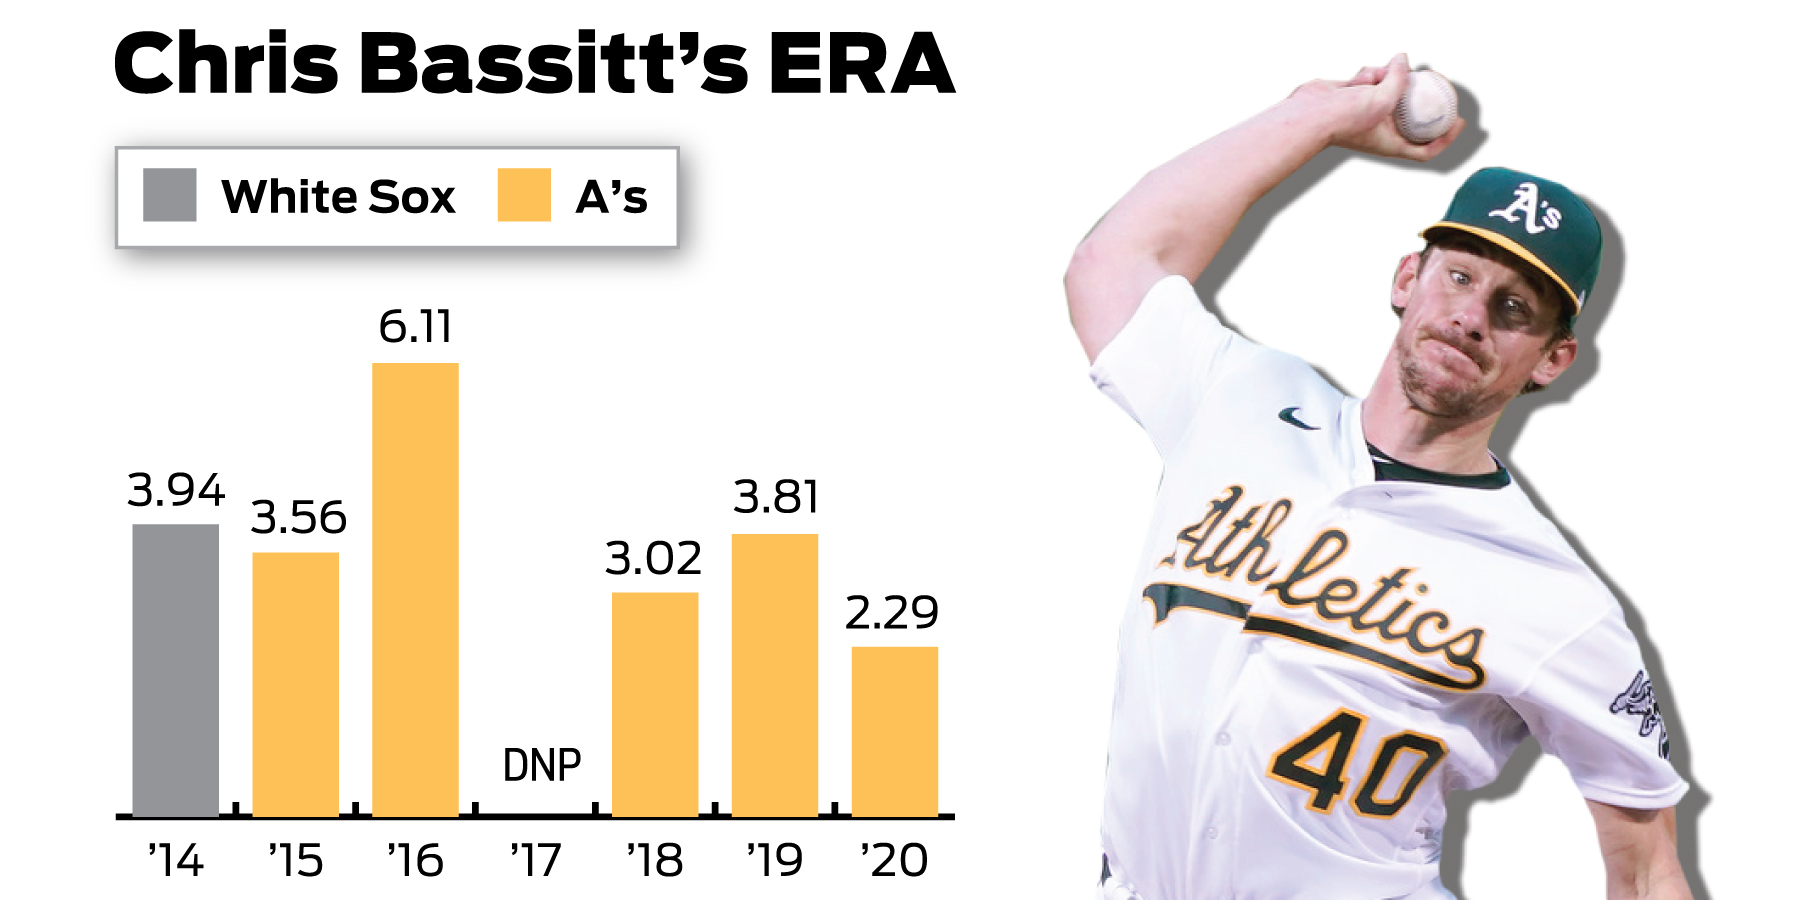 A's Chris Bassitt says start against White Sox, who drafted him